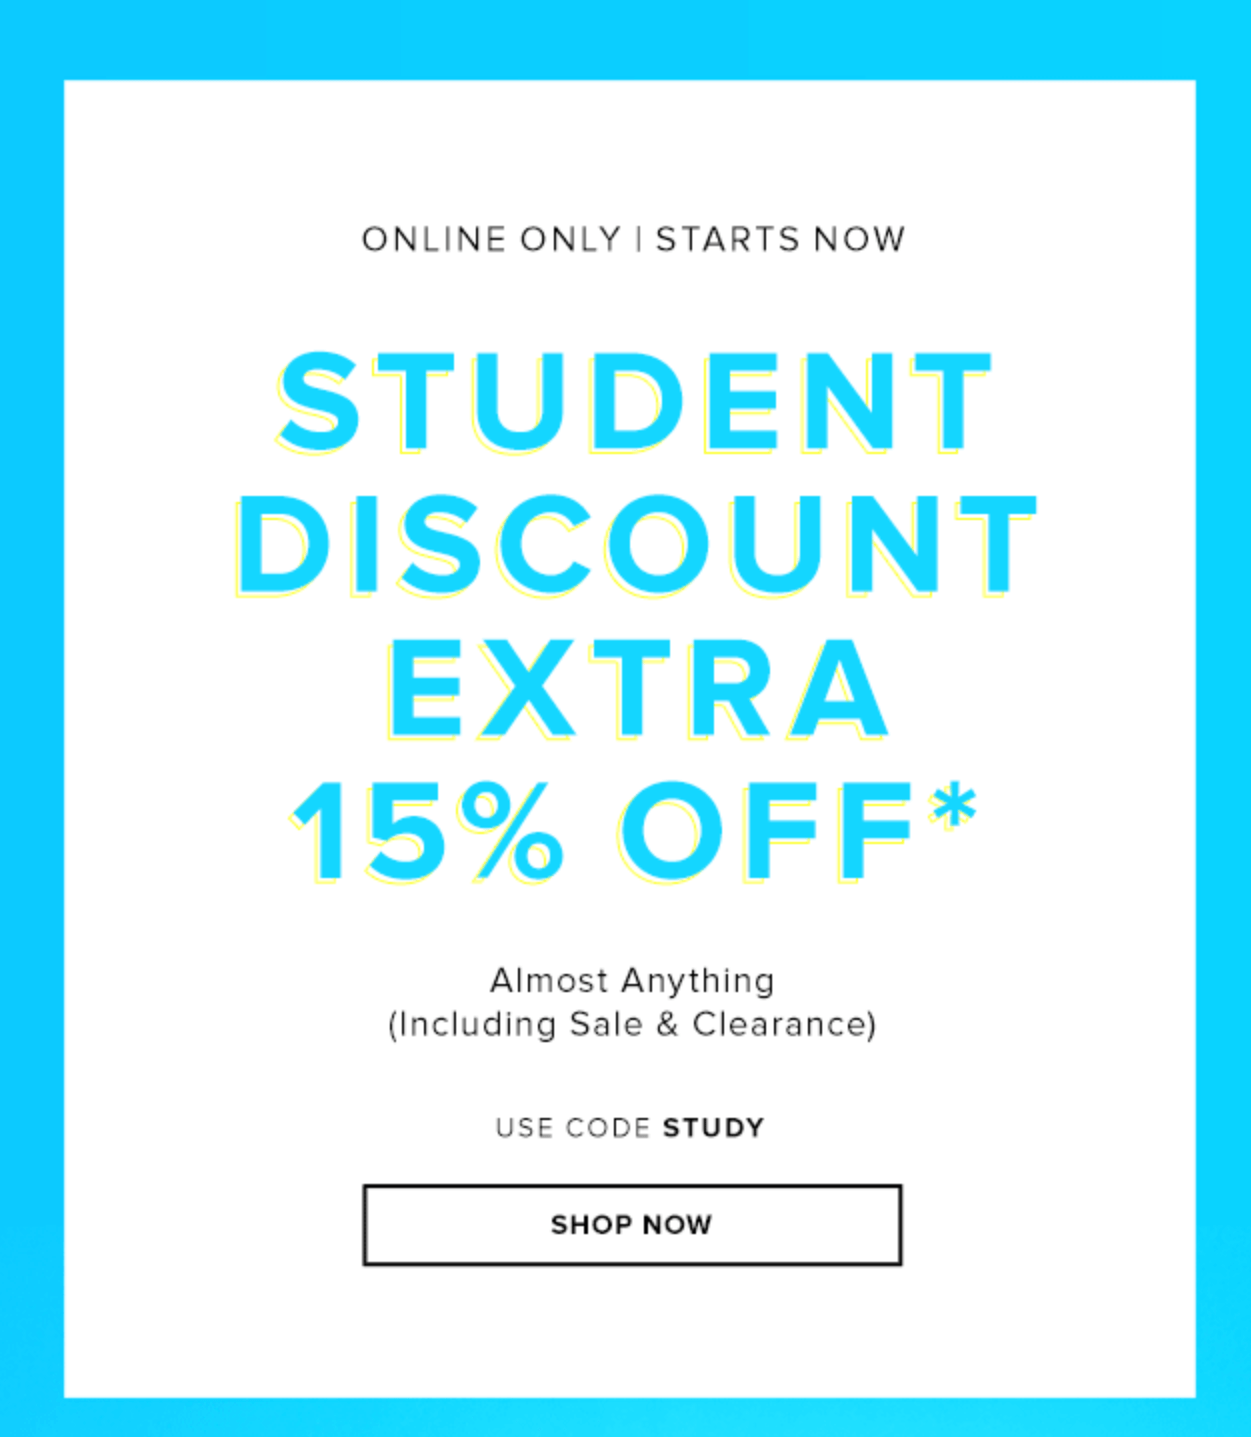 Hudson's Bay Canada Student Discount: Save An Additional 15% Off Almost  Anything + Bay Day Deals Up to 70% Off - Canadian Freebies, Coupons, Deals,  Bargains, Flyers, Contests Canada Canadian Freebies, Coupons